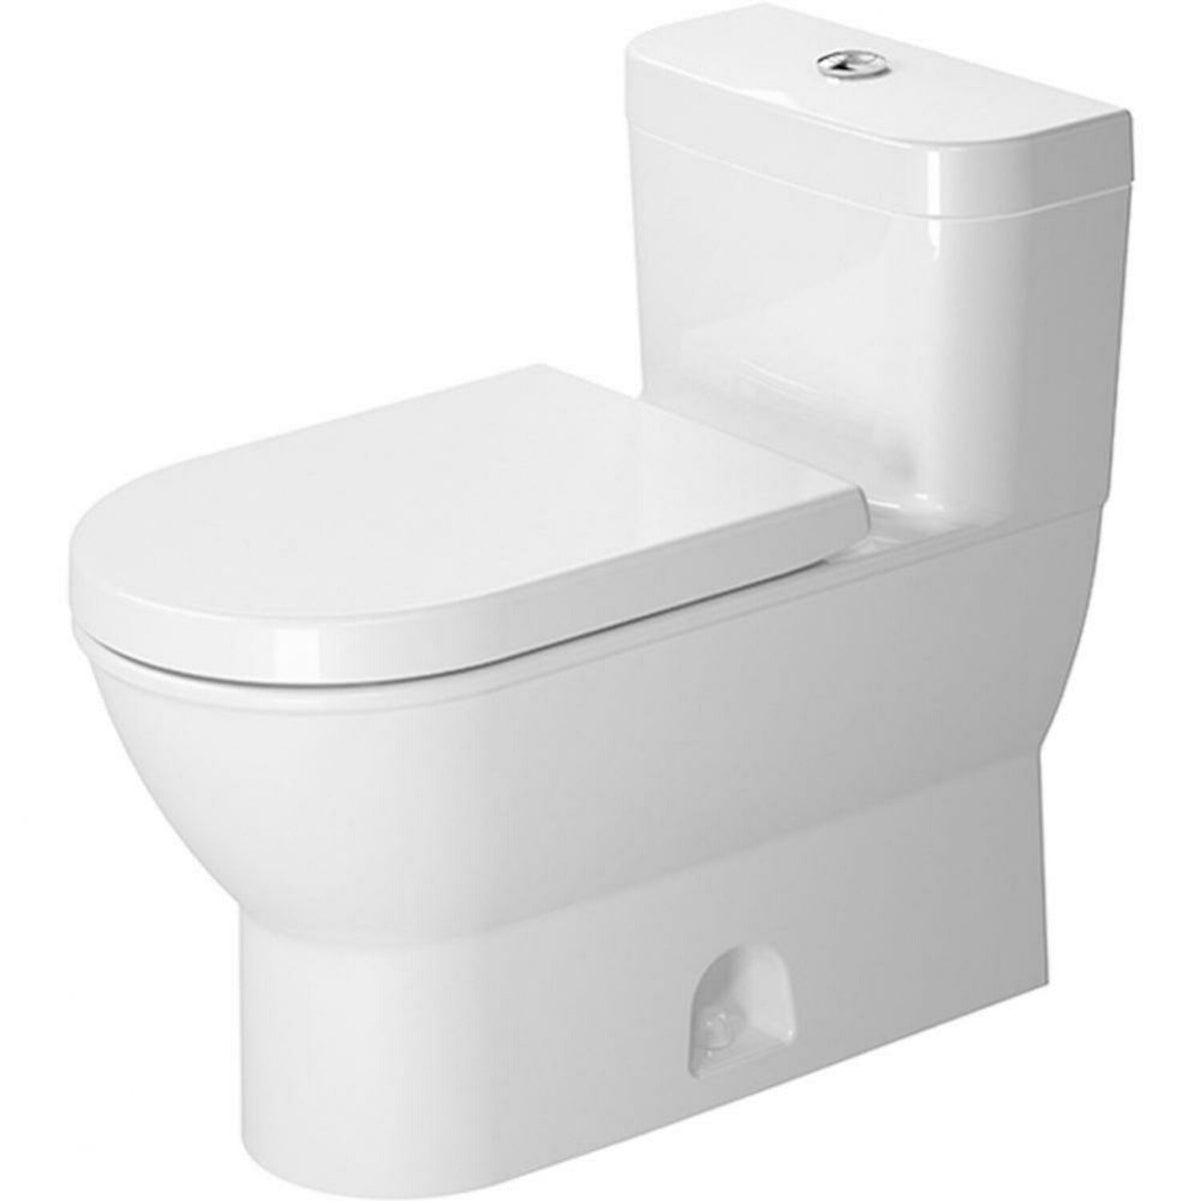 DARLING NEW ONE-PIECE TOILET